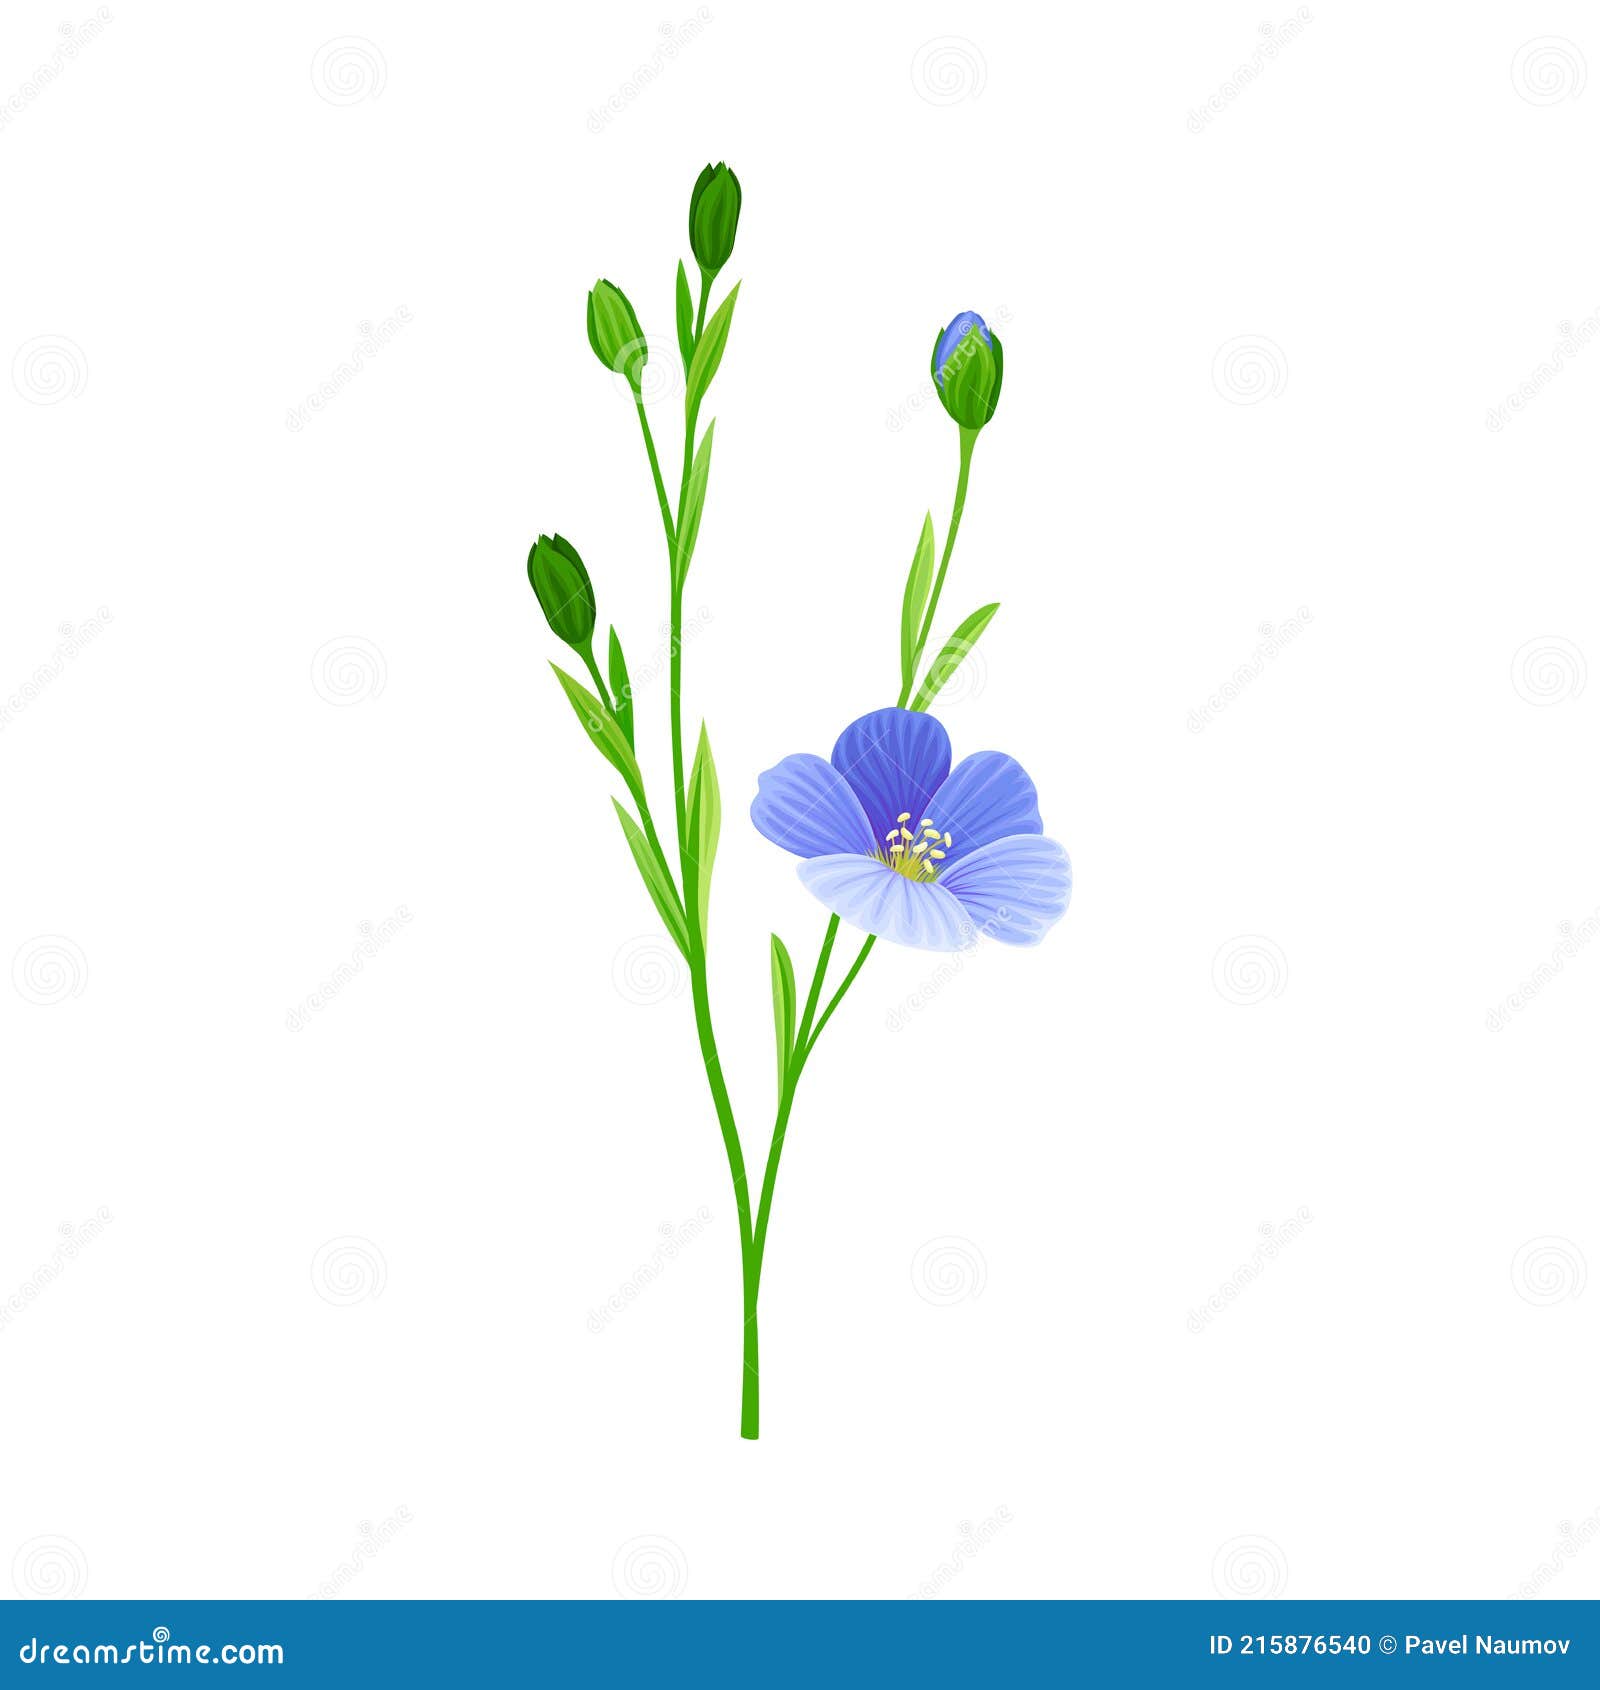 Flax or Linseed As Cultivated Flowering Plant Specie with Blue Flowers ...